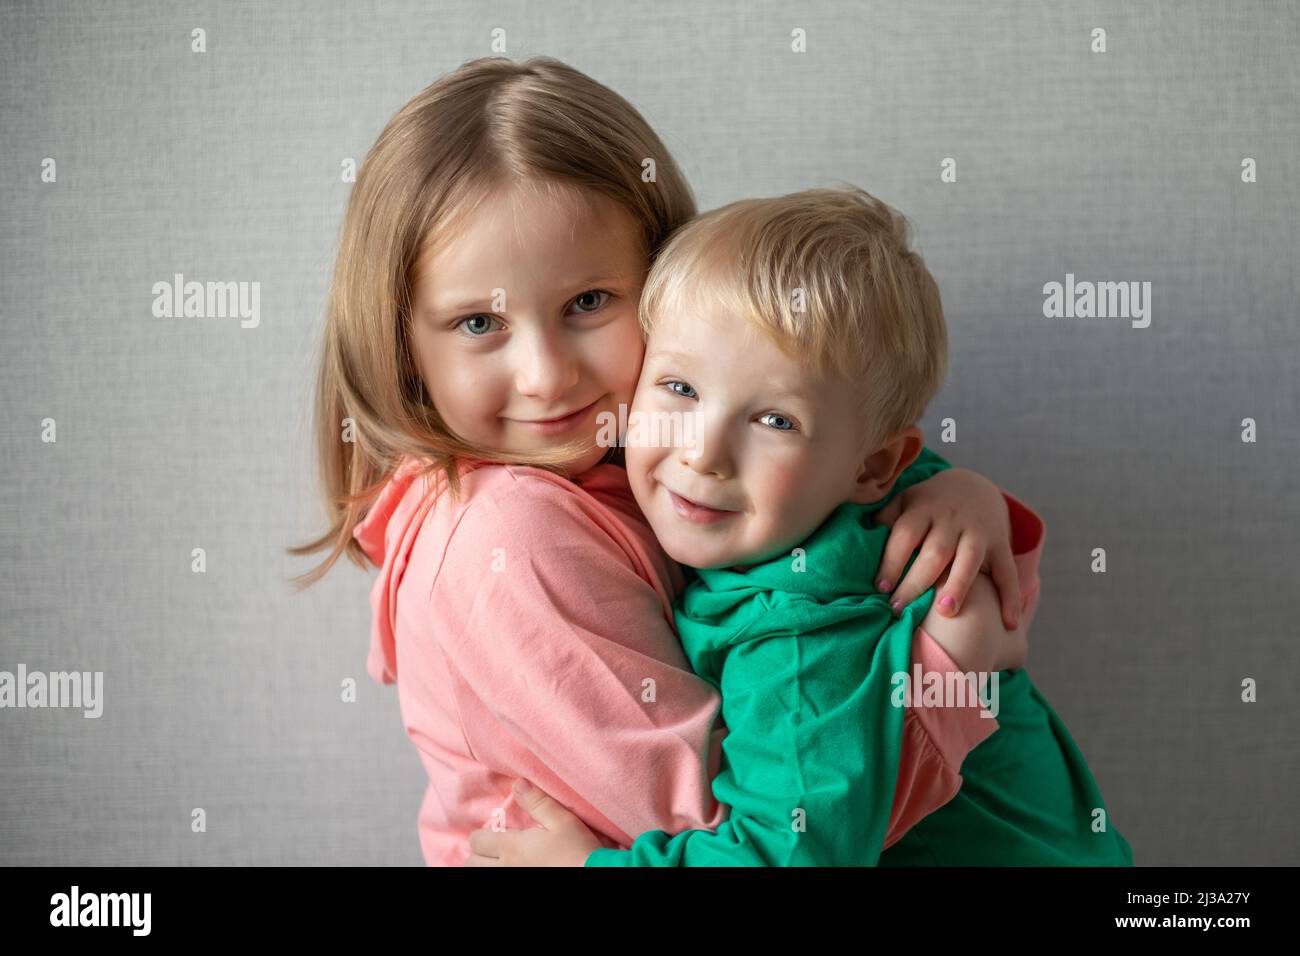 close-up portrait of two children happy and smiling. Blonde brother and sister hugging, sibling relationship concept. funny kids. Boy and girl hugging Stock Photo